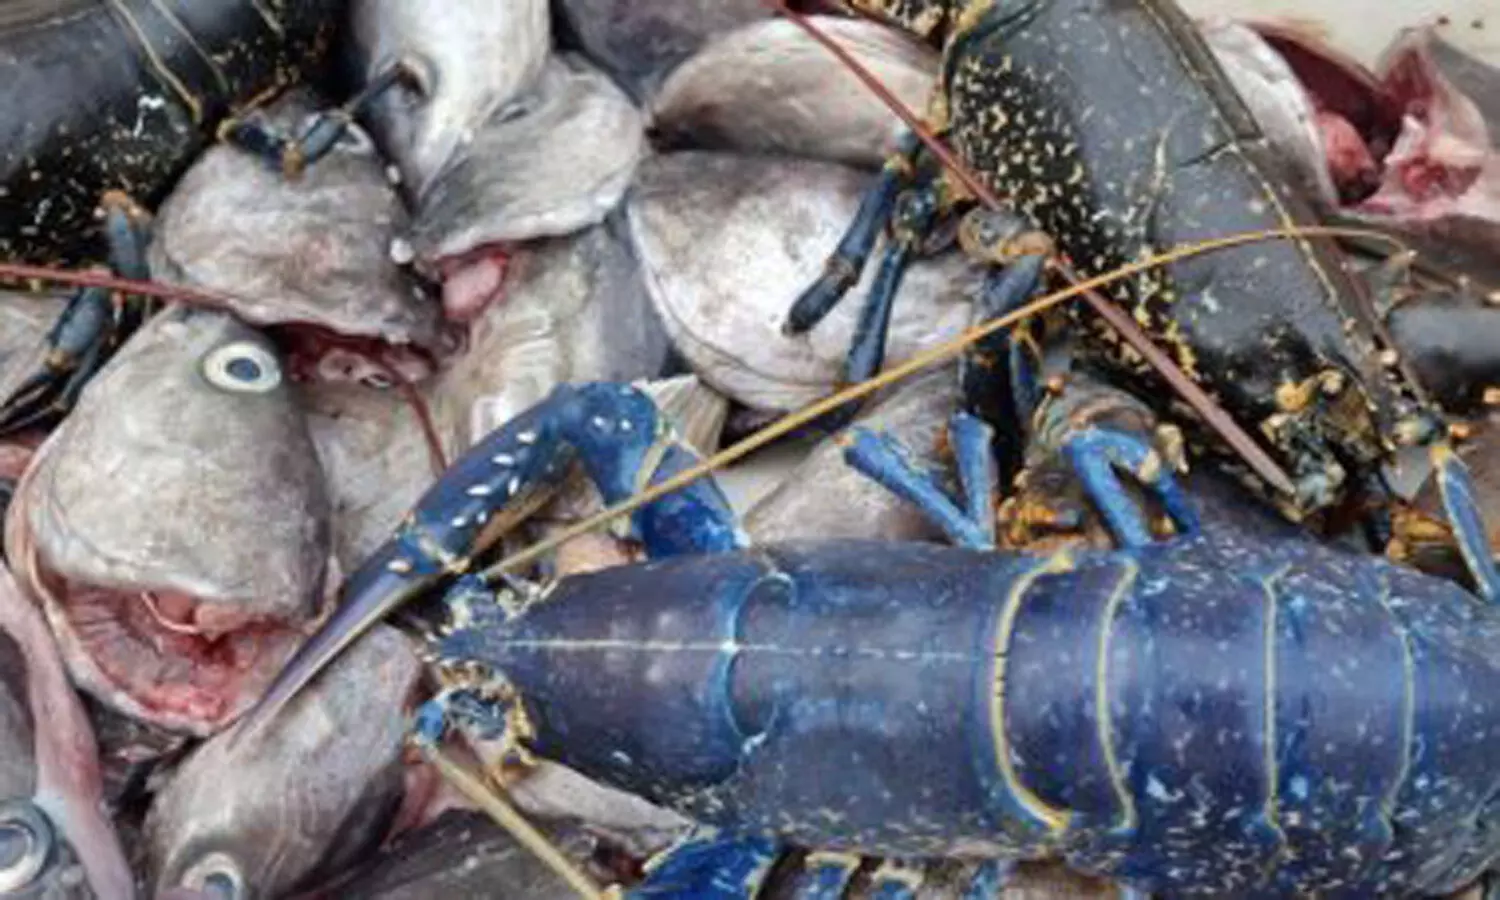 One in a million: Fisherman finds blue lobster, shares pics; Images go viral